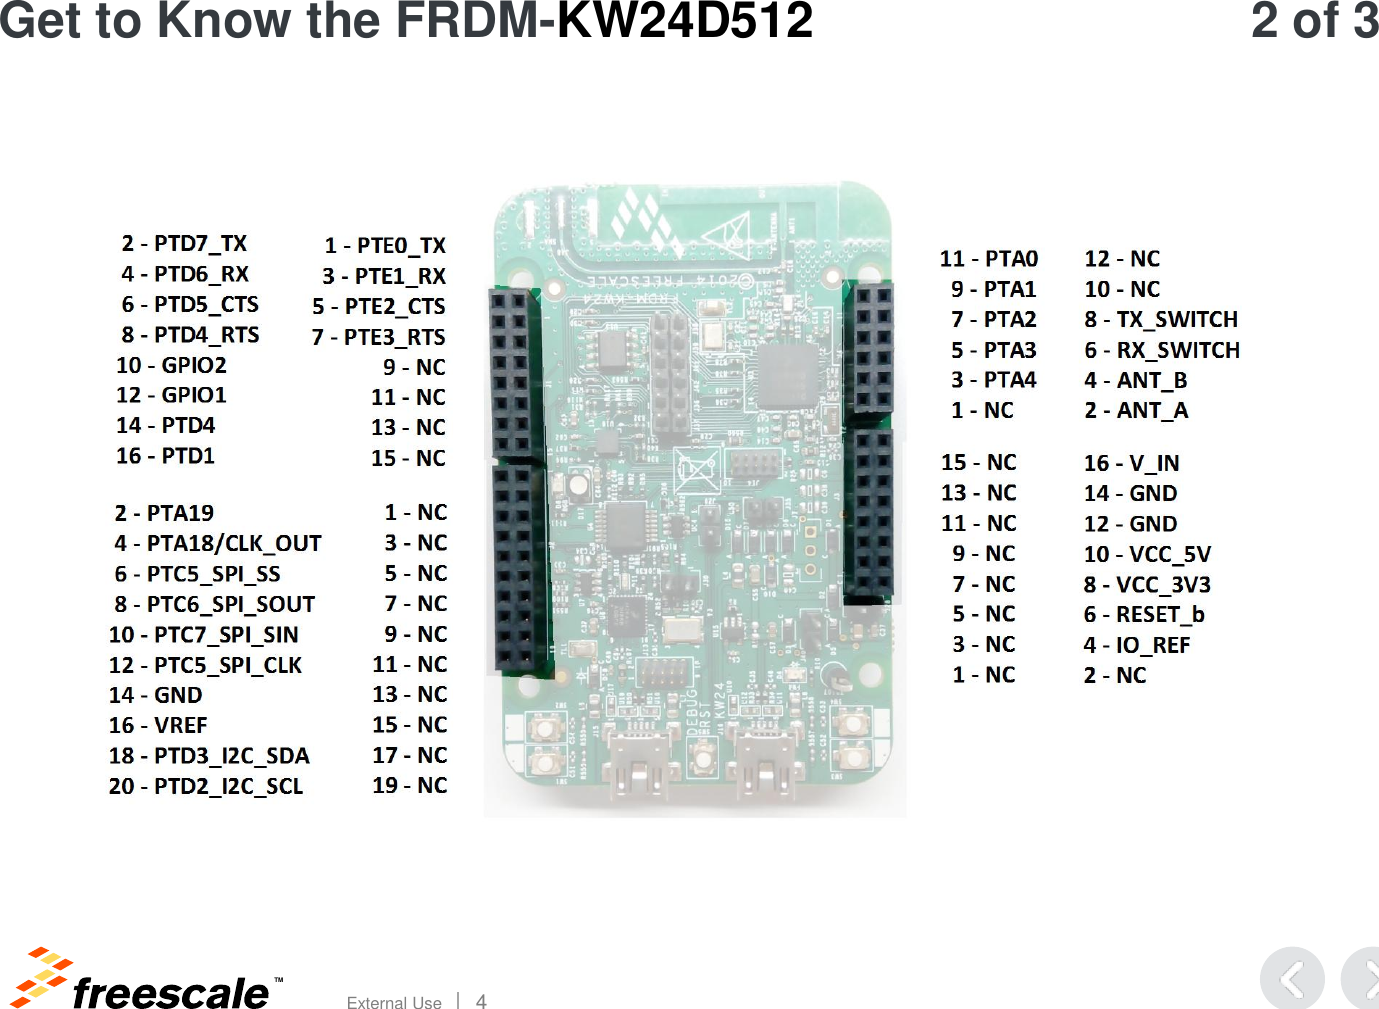 TM External Use       4 Get to Know the FRDM-KW24D512  2 of 3 